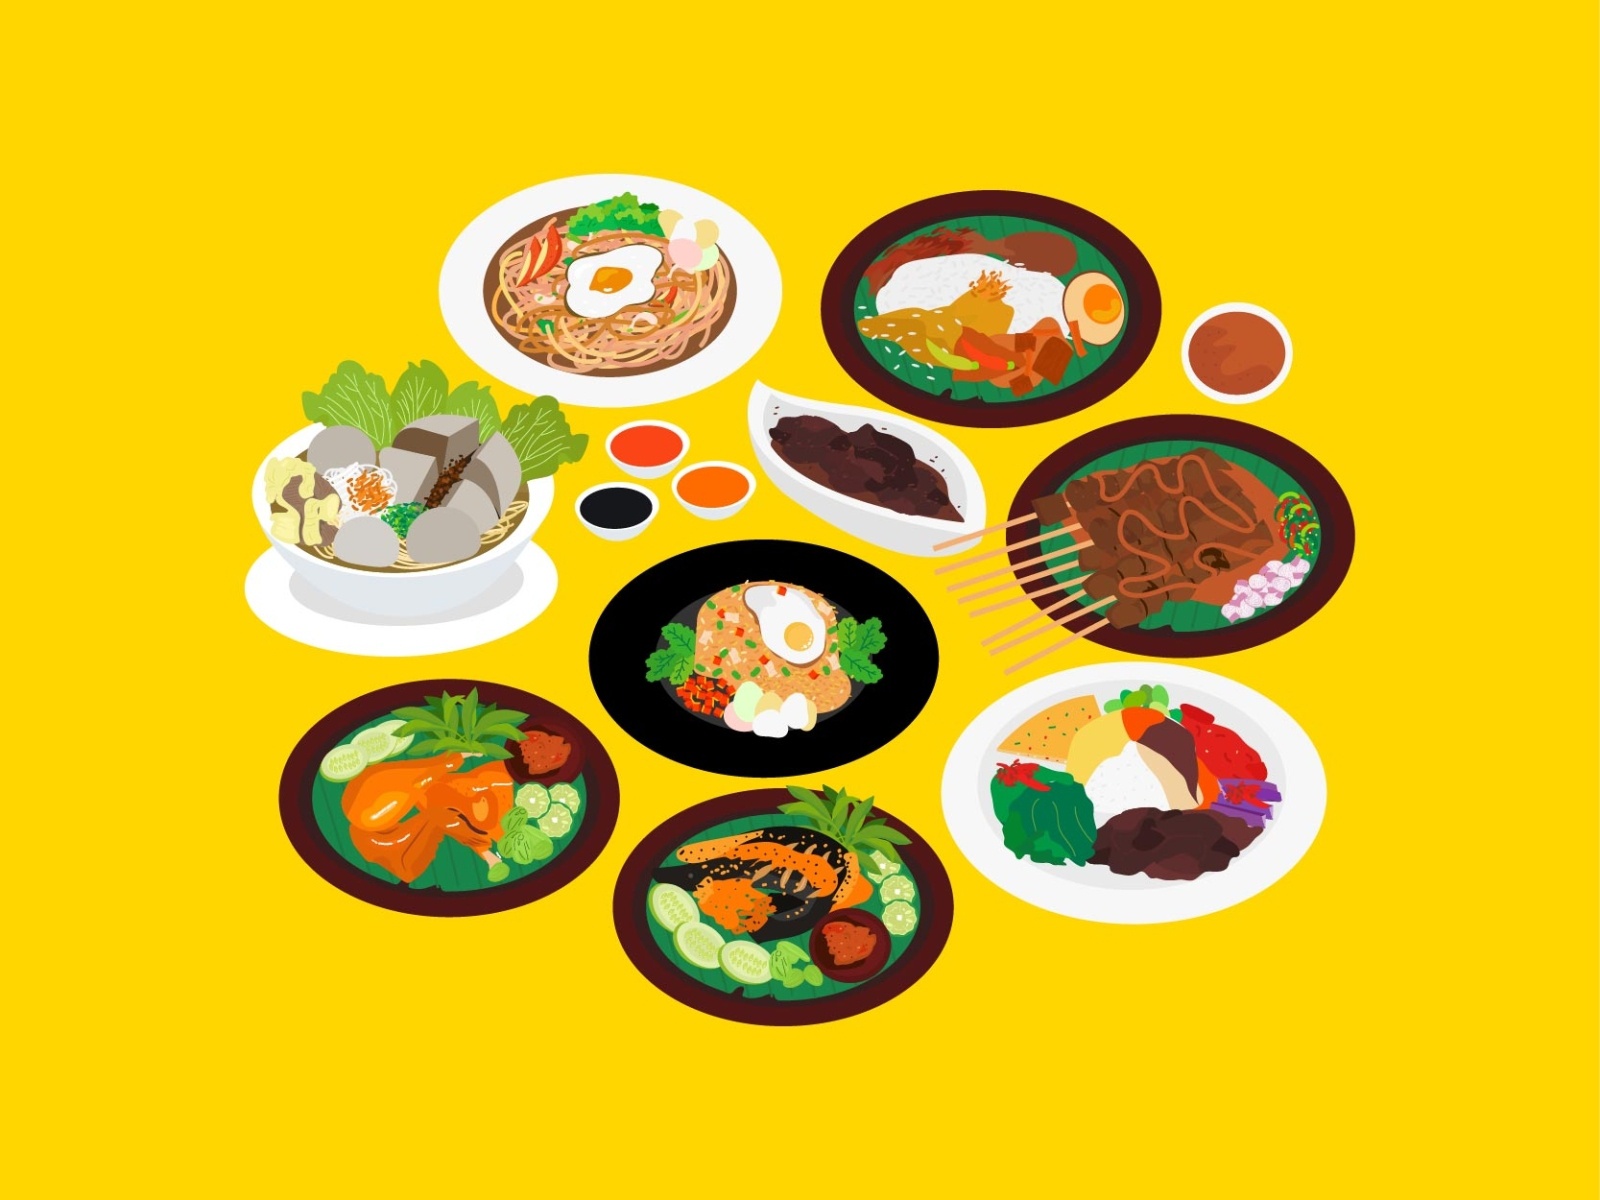 9 Most Popular Indonesian Food by Griyolabs on Dribbble